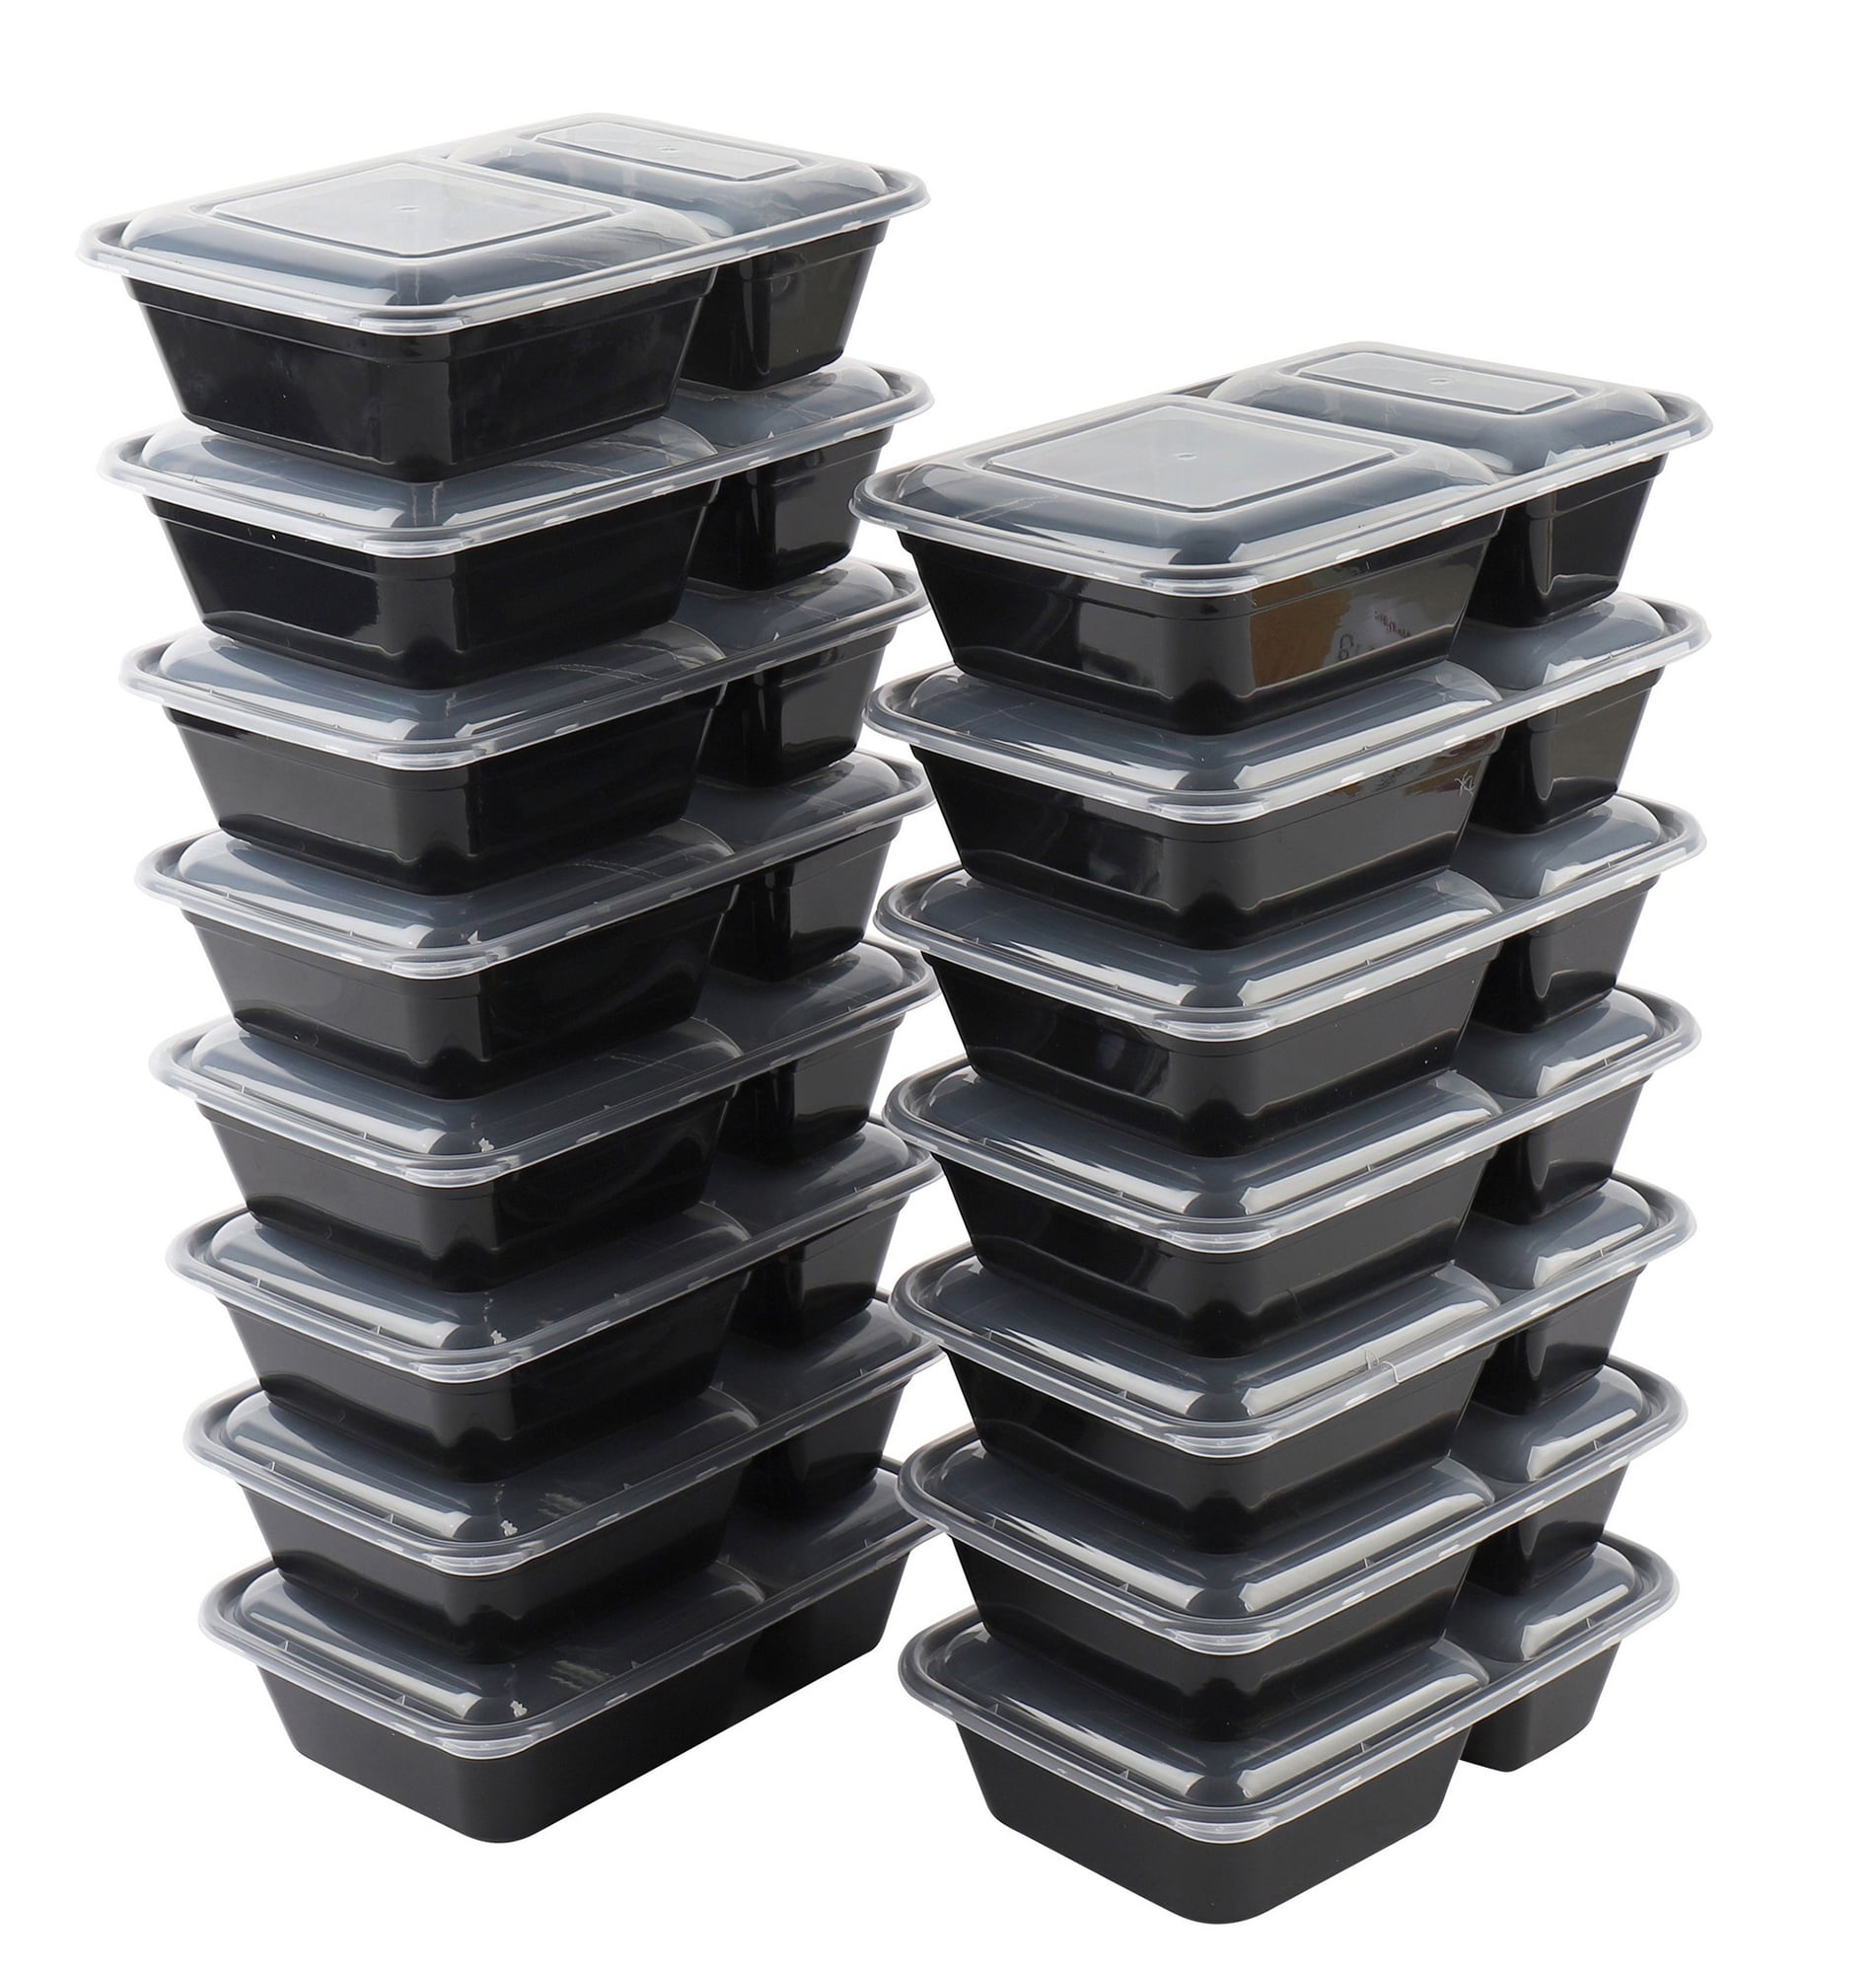 Kitch'nMore 38oz Meal Prep Containers, Extra Large &Thick, 2 Compartment  with Lids,Food Storage Cont…See more Kitch'nMore 38oz Meal Prep Containers